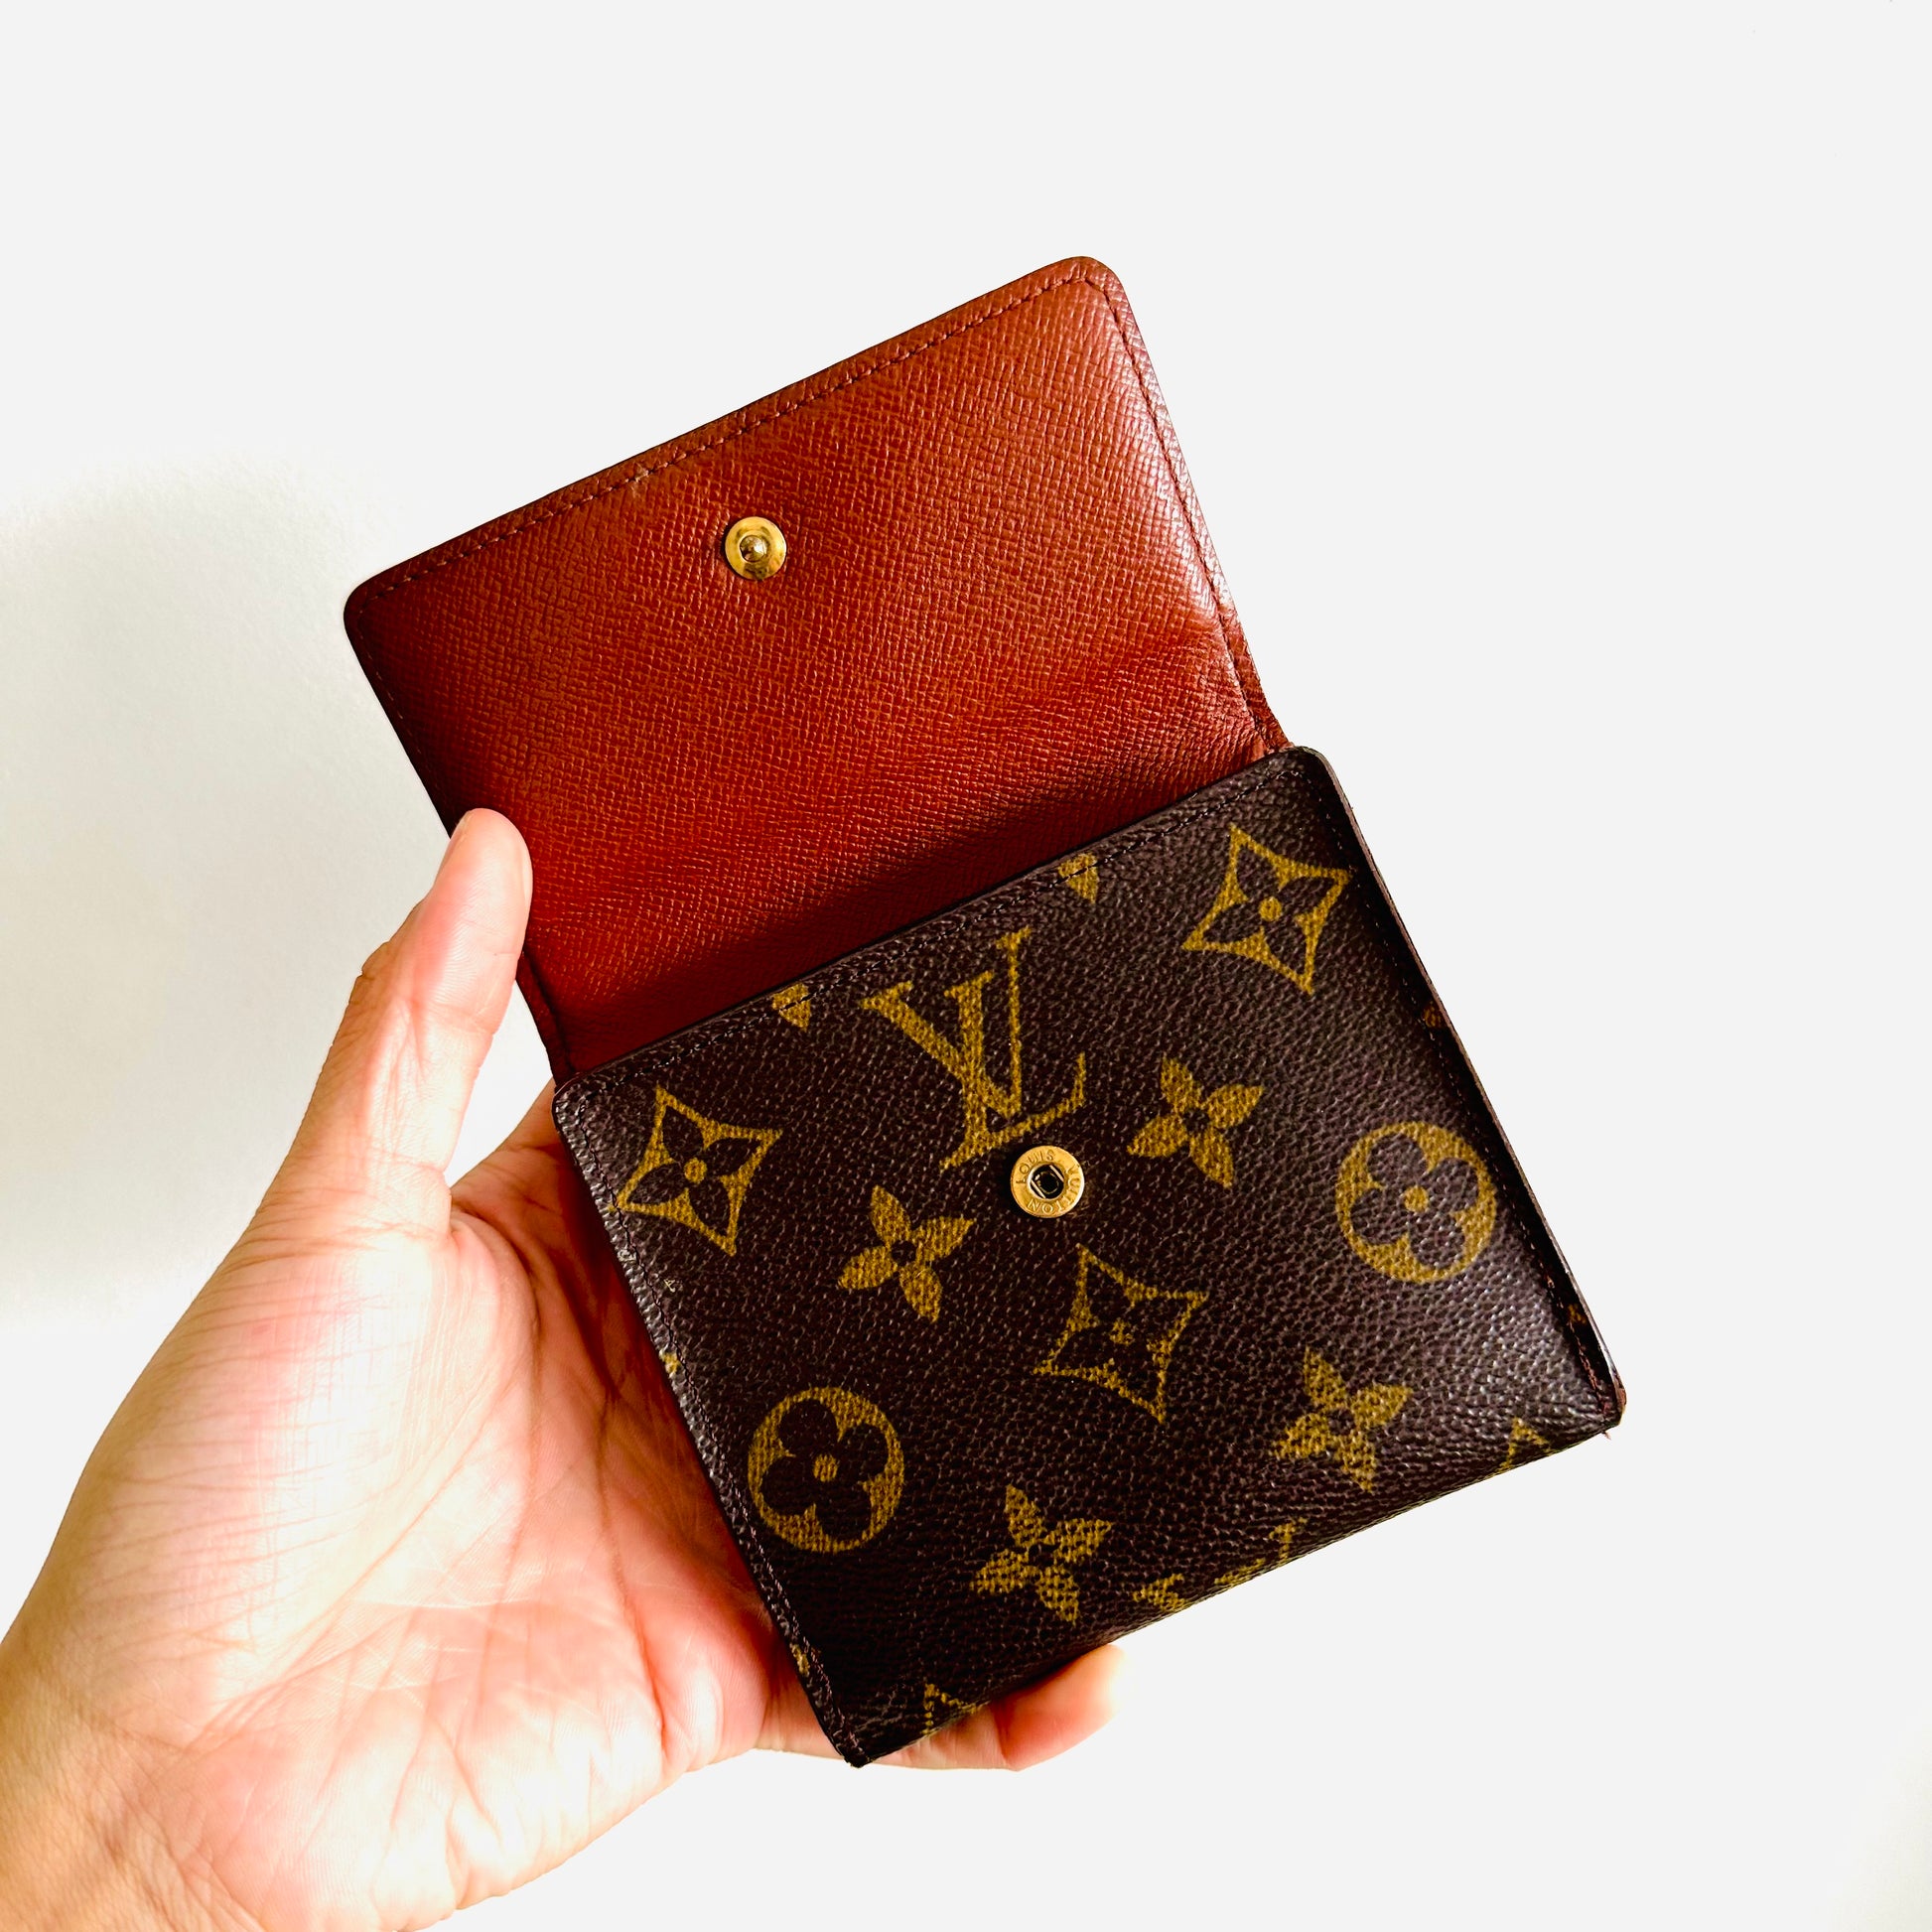 Louis Vuitton Elise Double Sided Compact French Wallet LV-1203P-0008